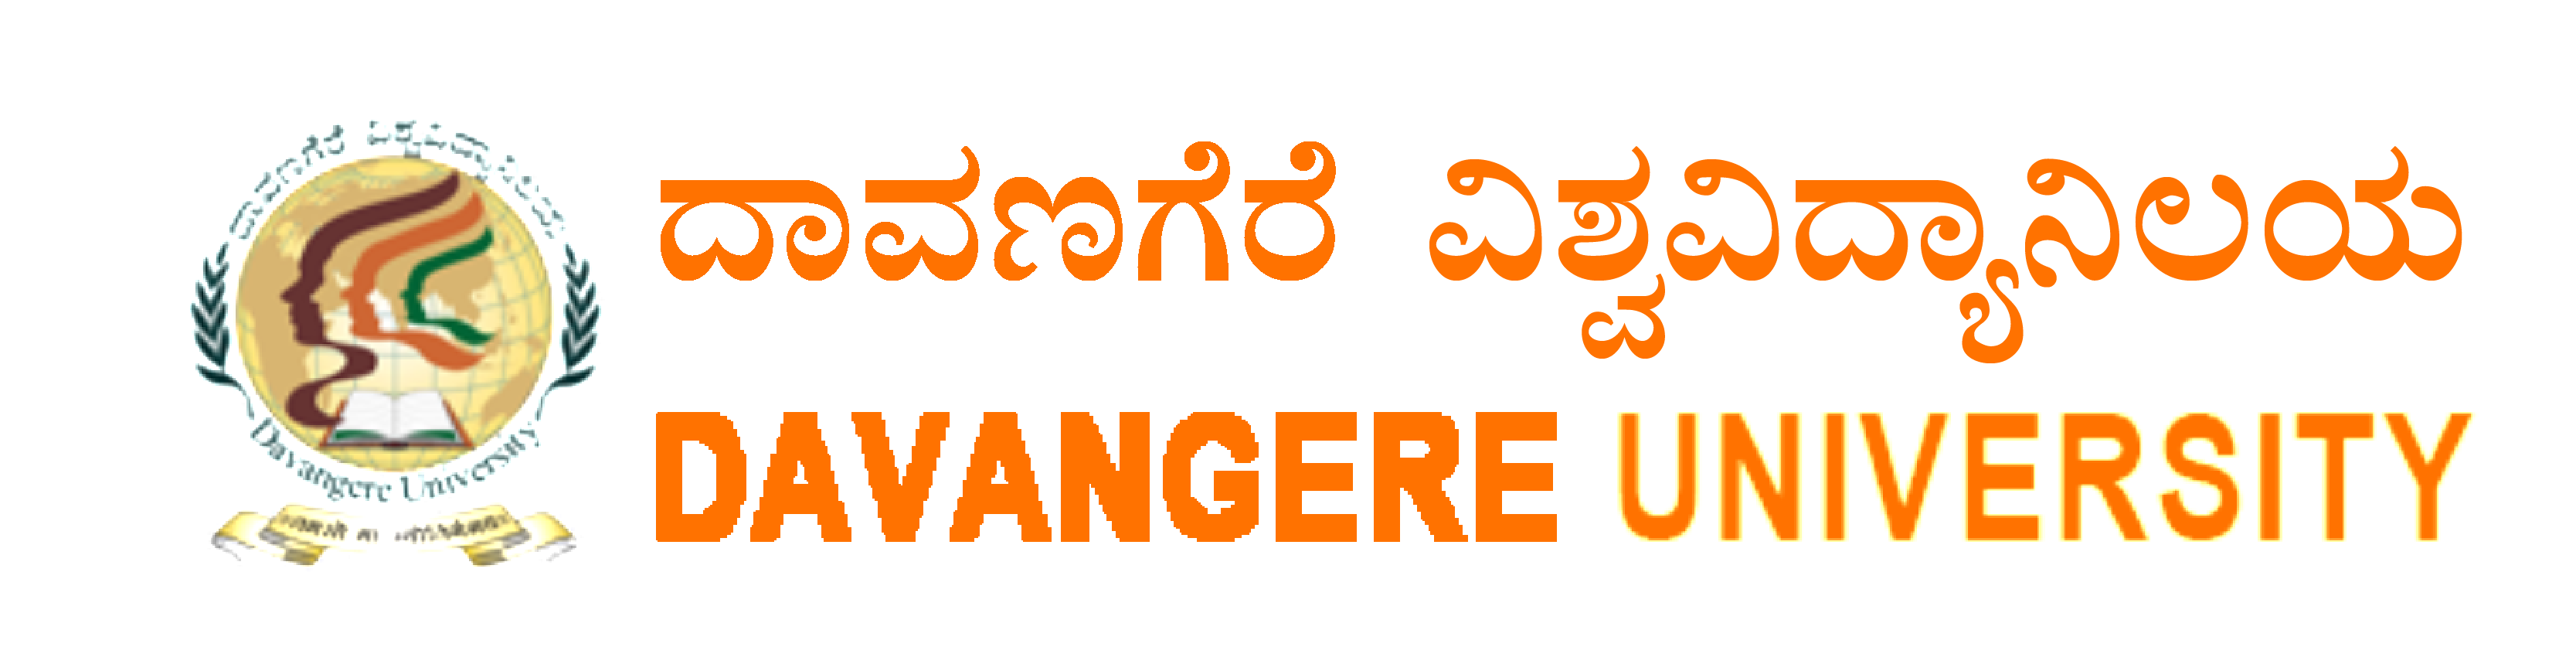 Davanagere University Question Papers [year] - Old Papers, Sample Model Papers 1